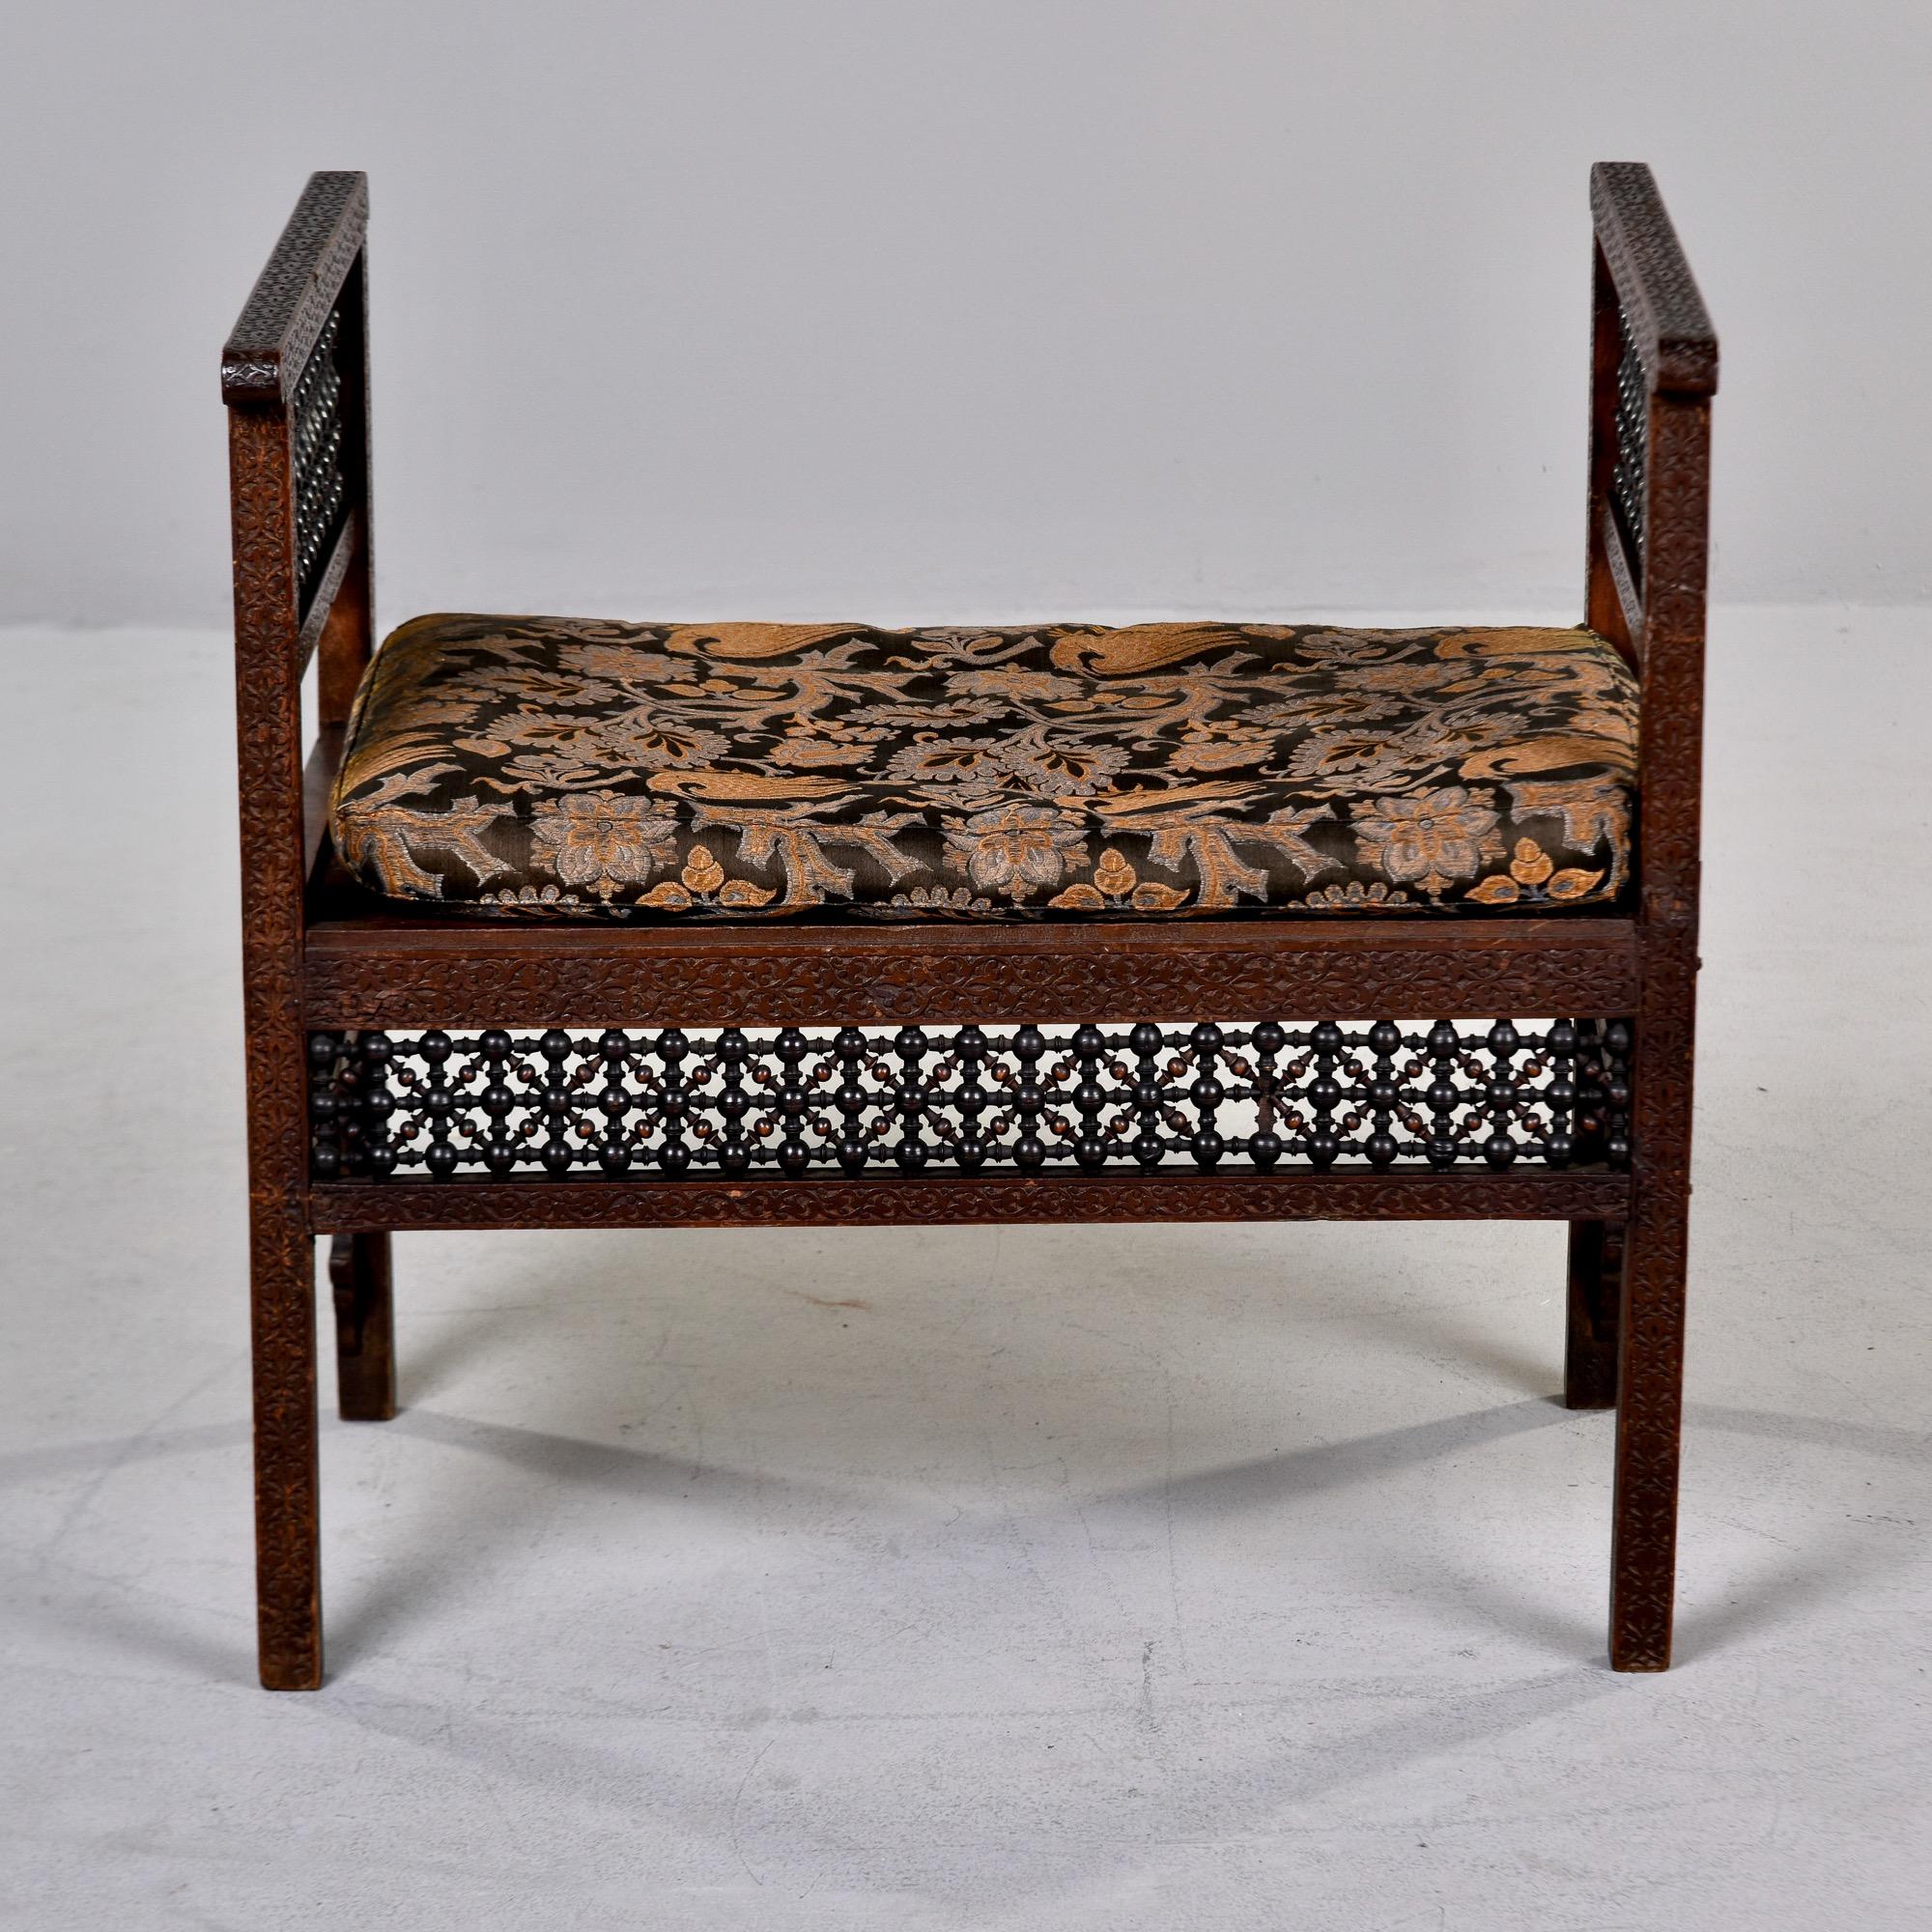 Upholstery Early 20th C Heavily Carved Teak Moorish Bench With Tall Sides and Cushion For Sale